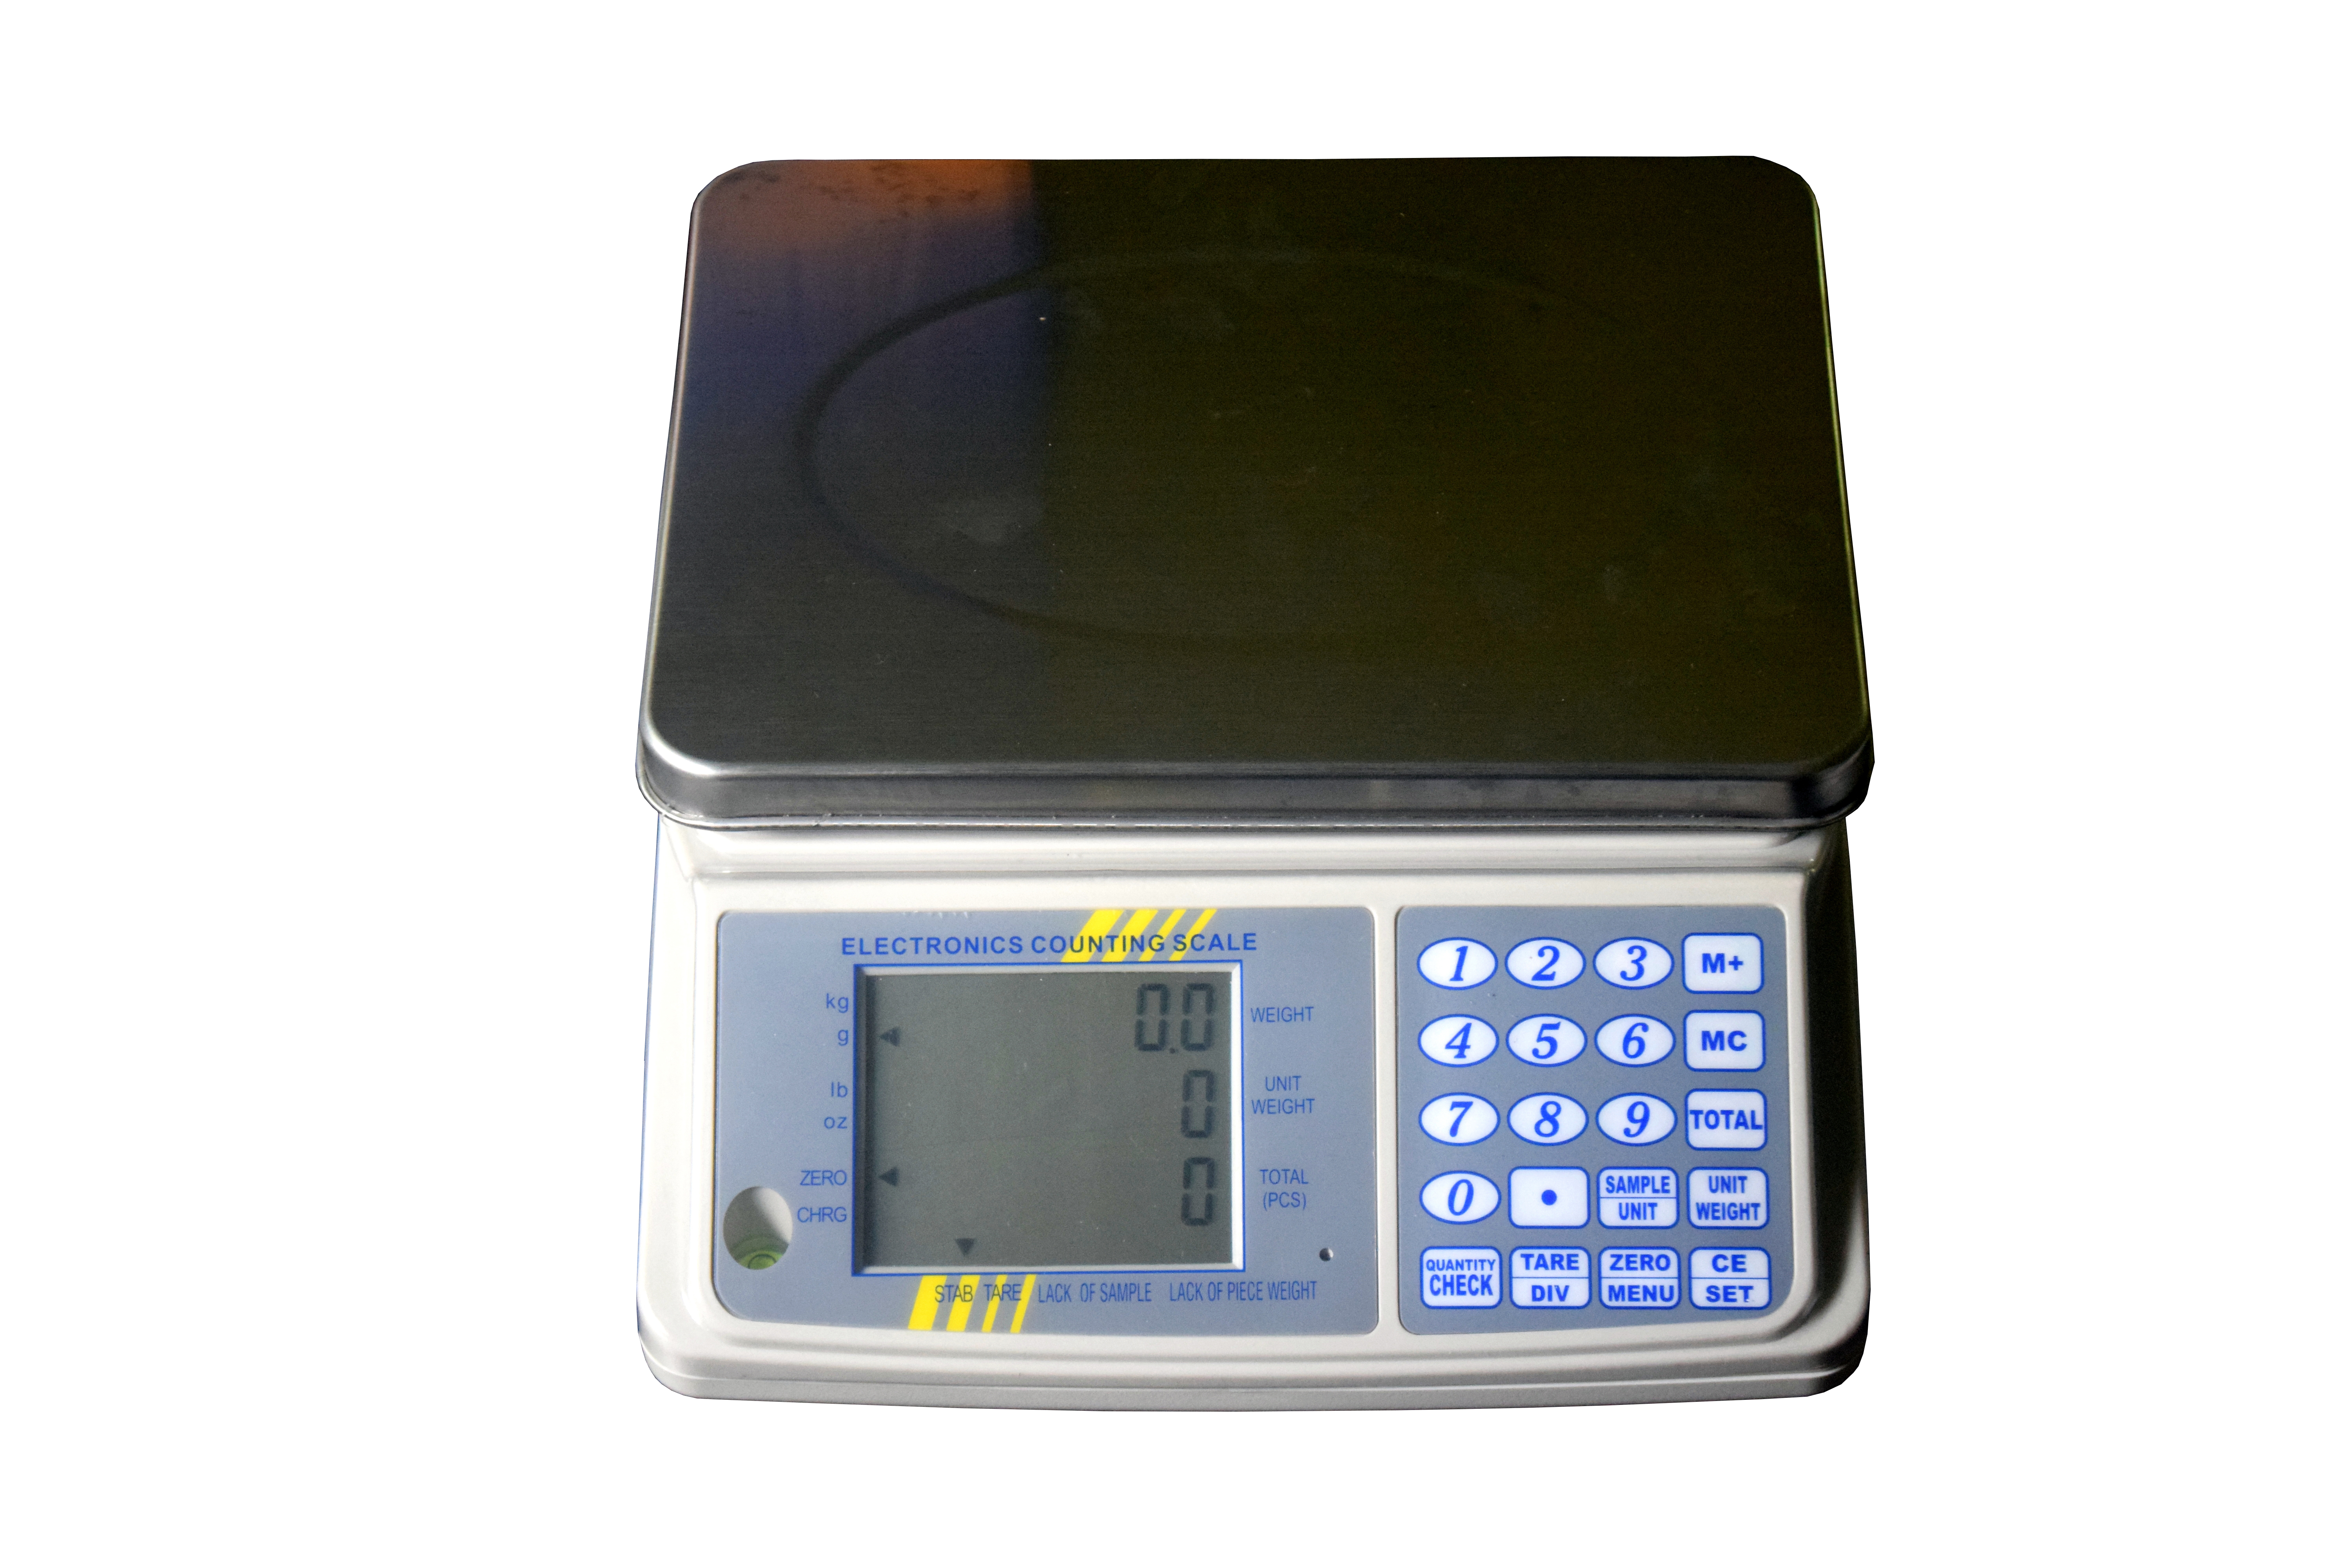 Portable Digital Weight Scale - Online Grocery Shopping and Delivery in  Bangladesh